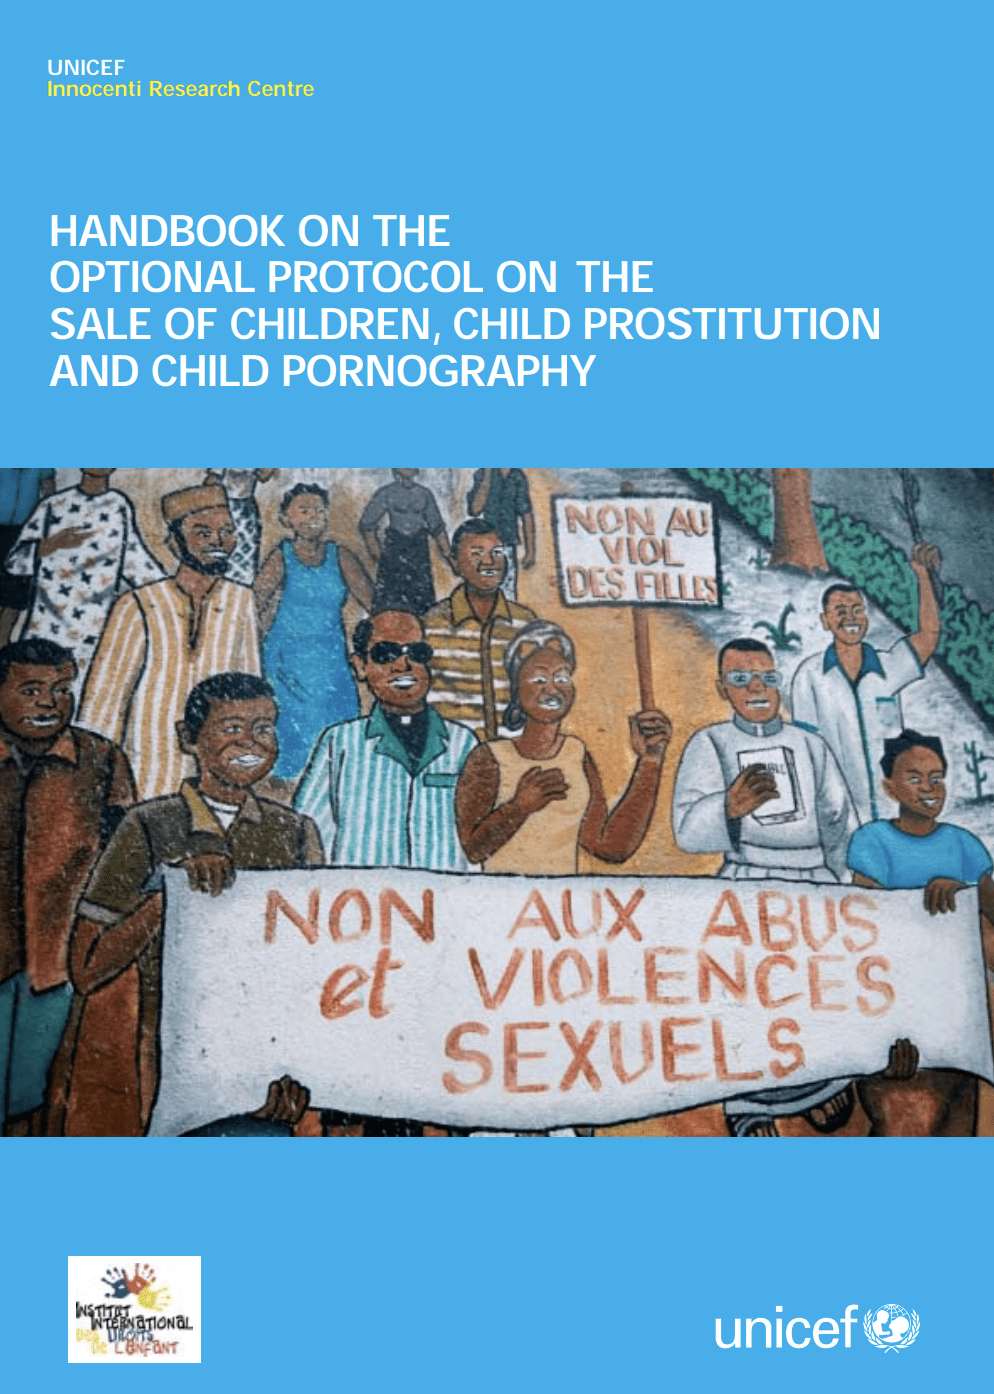 Handbook on the Optional Protocol on the Sale of Children, Child Prostitution, and Child Pornography